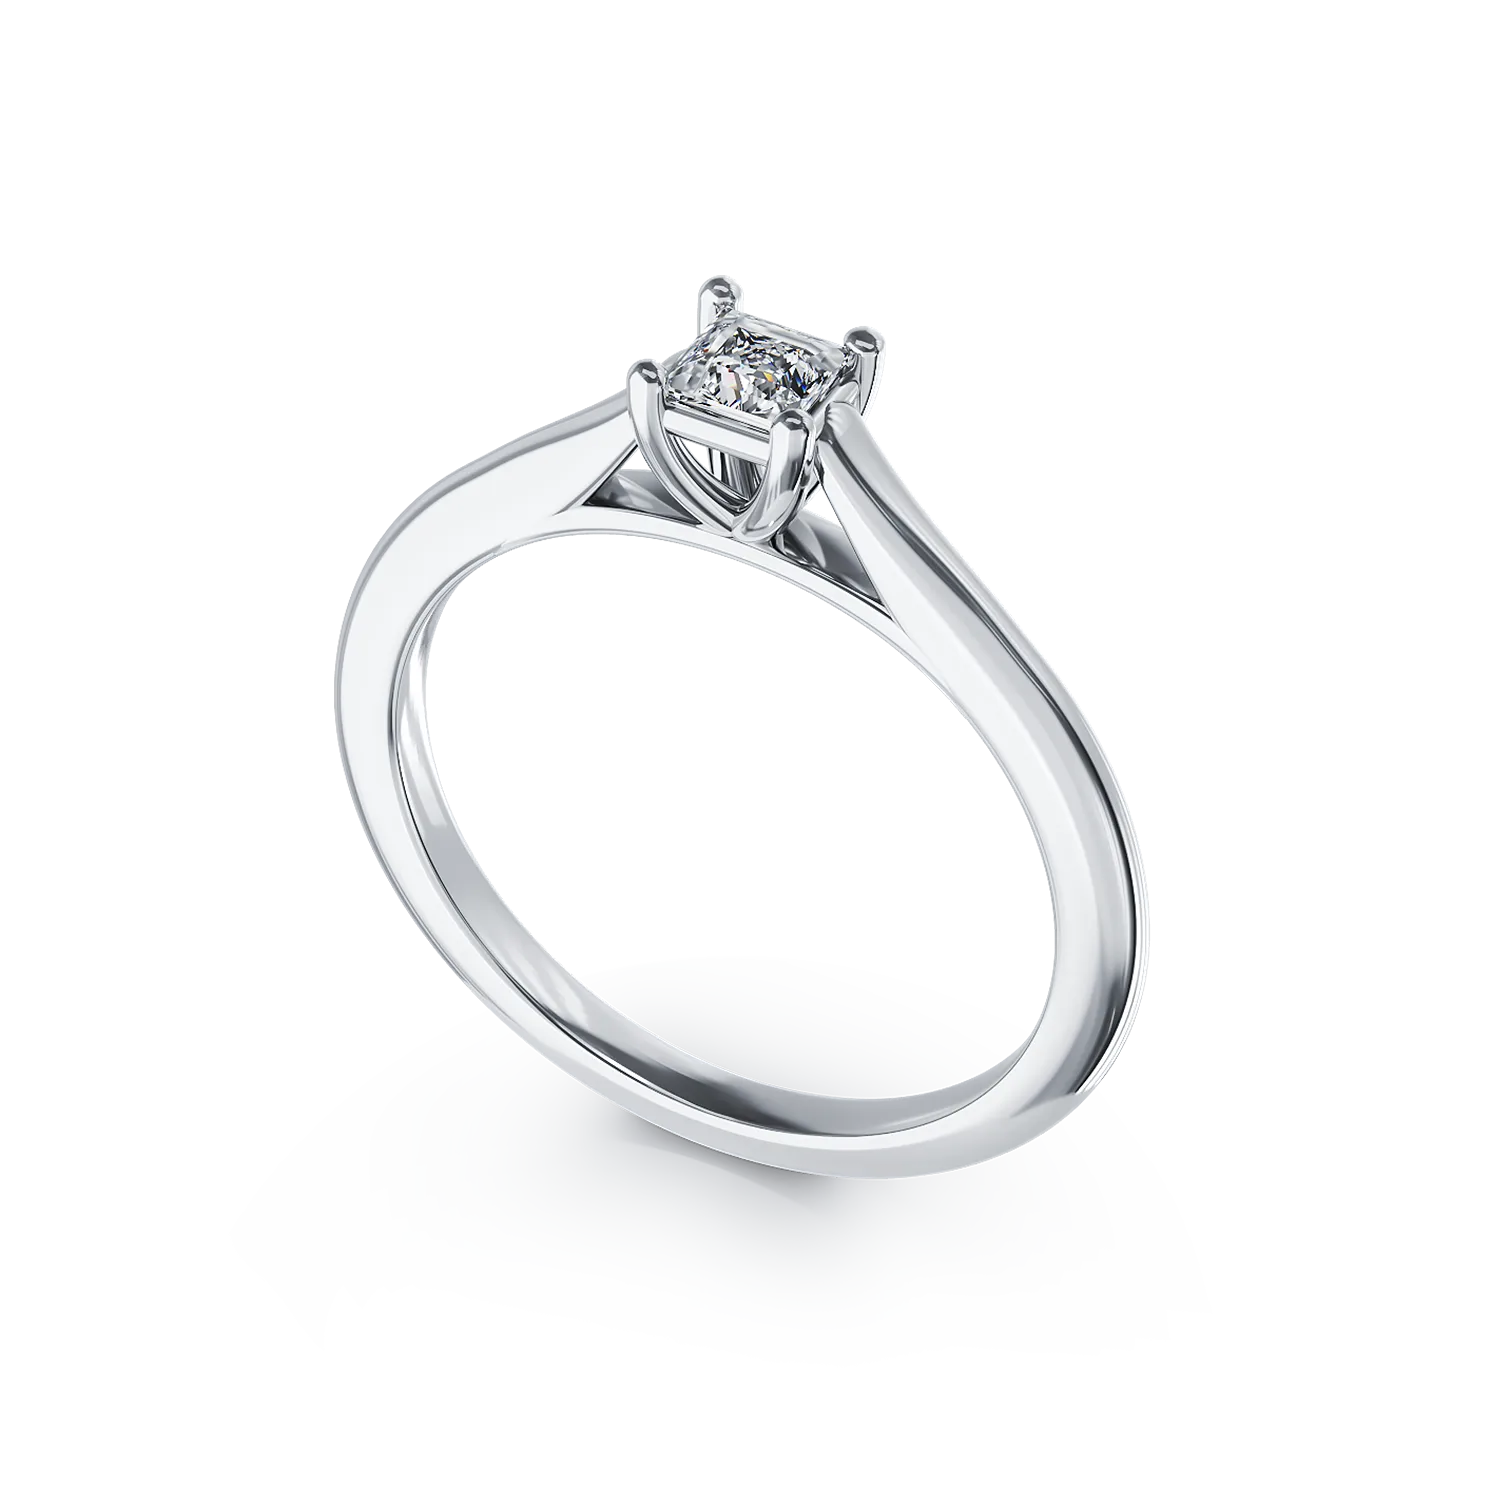 Platinum engagement ring with a 0.205ct solitaire diamond